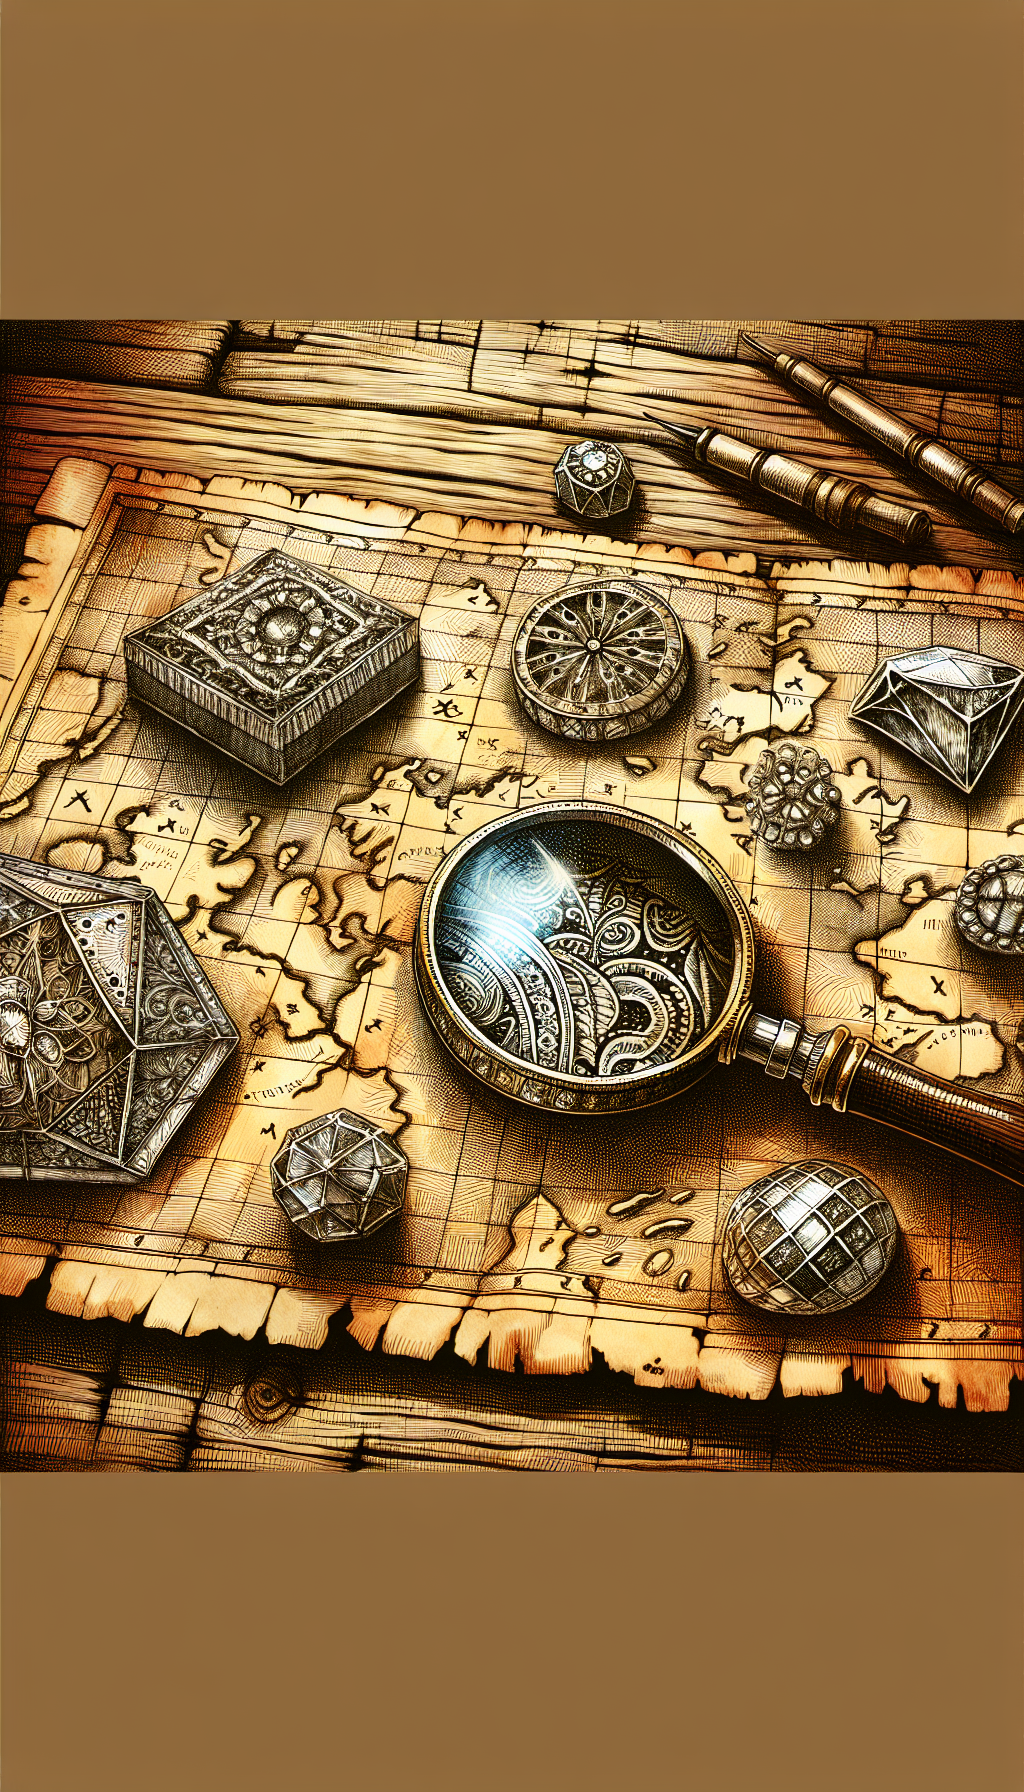 An illustration depicts a vintage, sepia-toned treasure map unfurling across a rustic wooden table, with specific Fire-King patterns marked as X's. In one corner, an illustrated jeweler's loupe magnifies the rare Jadeite pattern, while other sections shimmer with the intricate designs of Philbe. The map's texture subtly transitions from sketched crosshatching to vibrant watercolors, symbolizing the rediscovery of these timeless treasures.